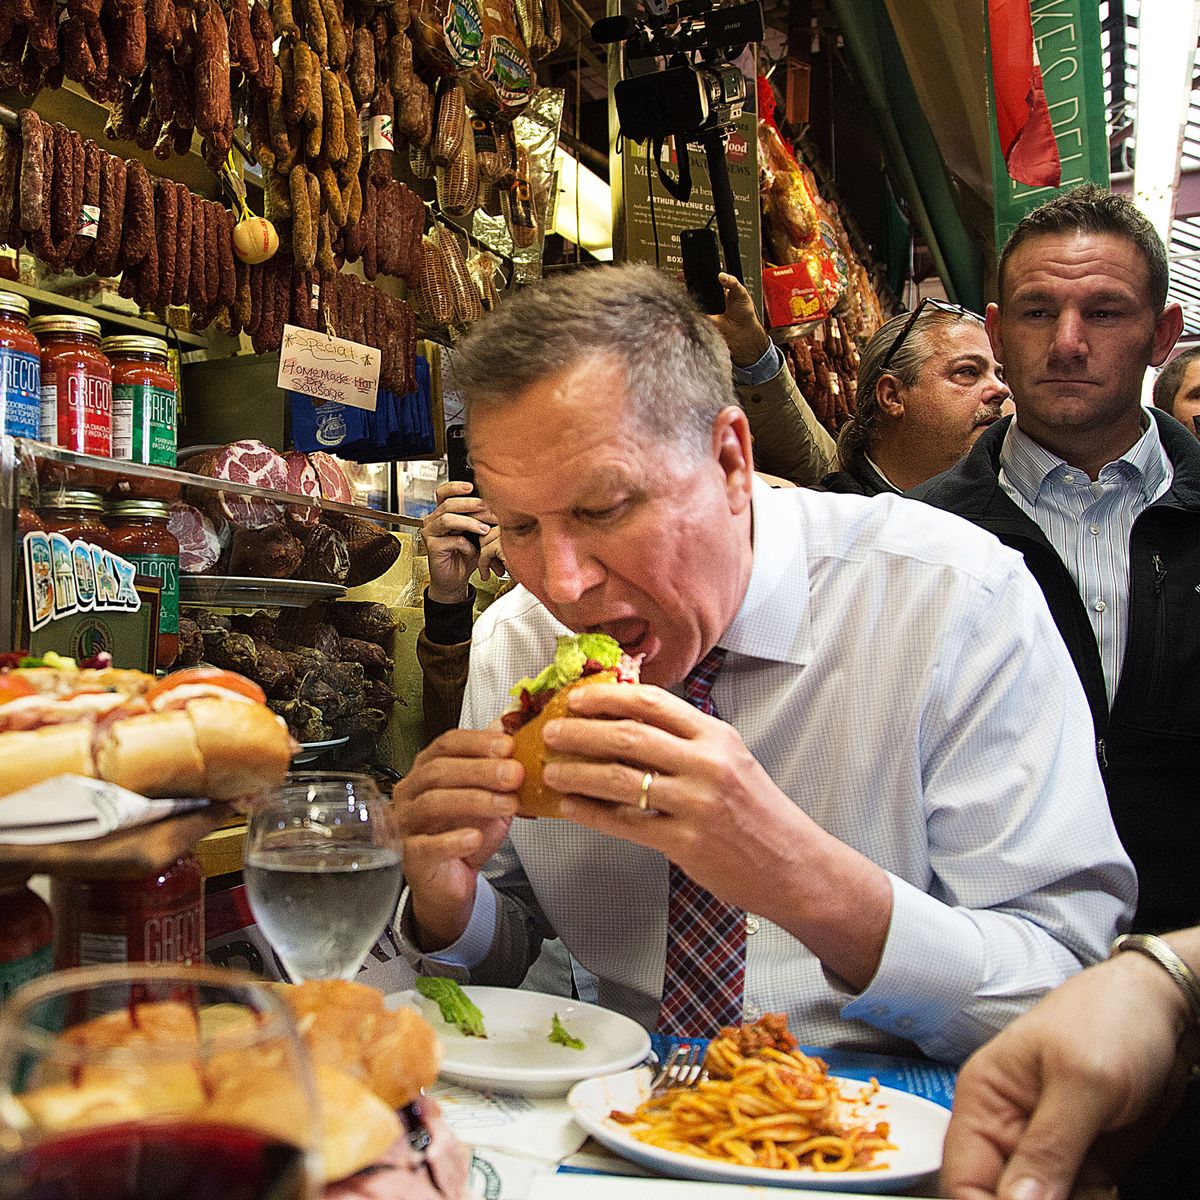 Politicians Need To Stop Eating Food In Public